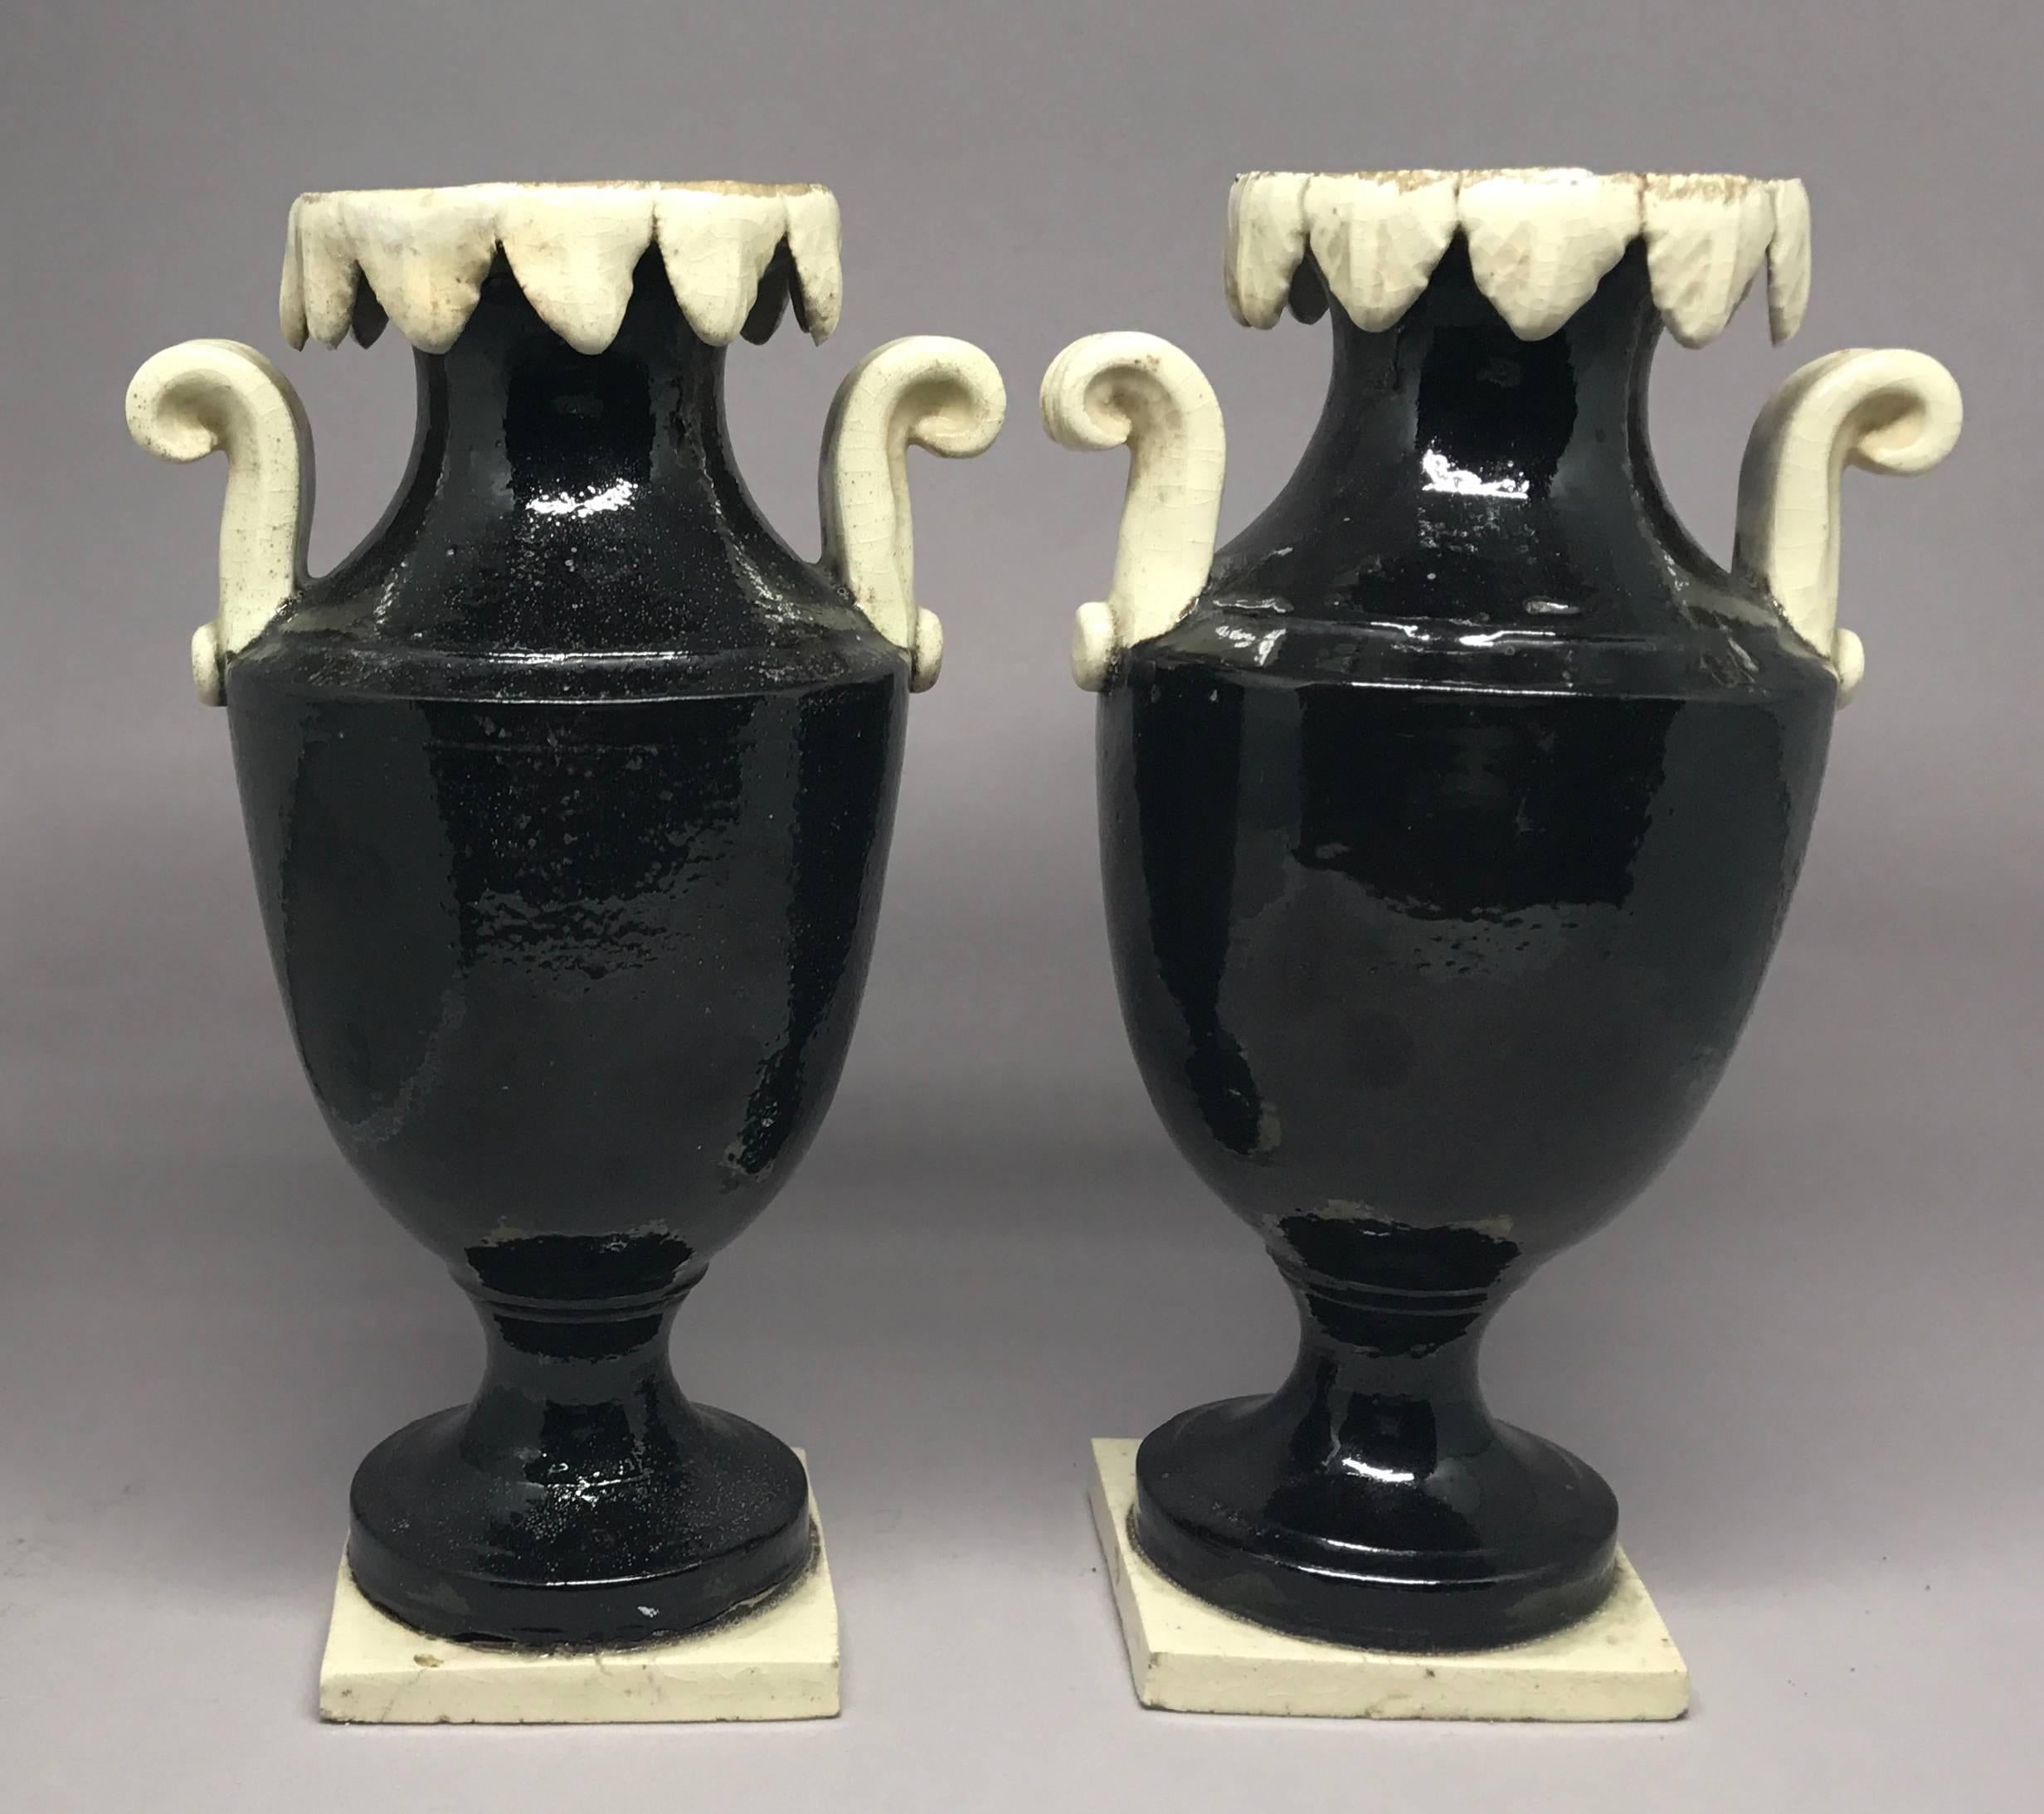 Pair of Neoclassical Black and White Giustiniani Urns For Sale 1